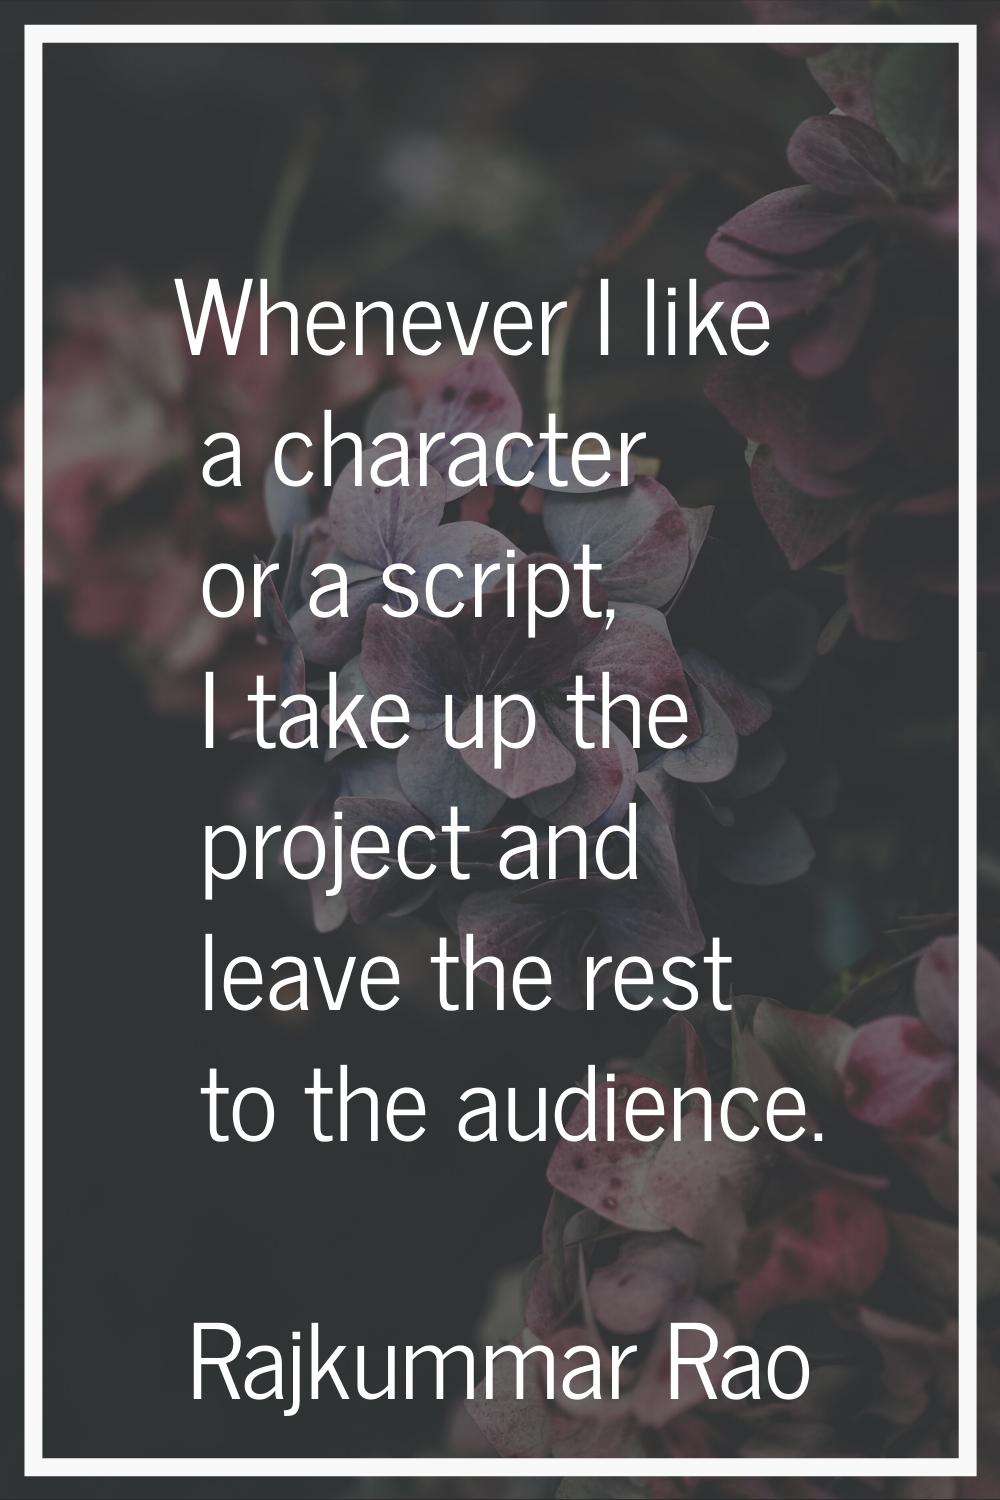 Whenever I like a character or a script, I take up the project and leave the rest to the audience.